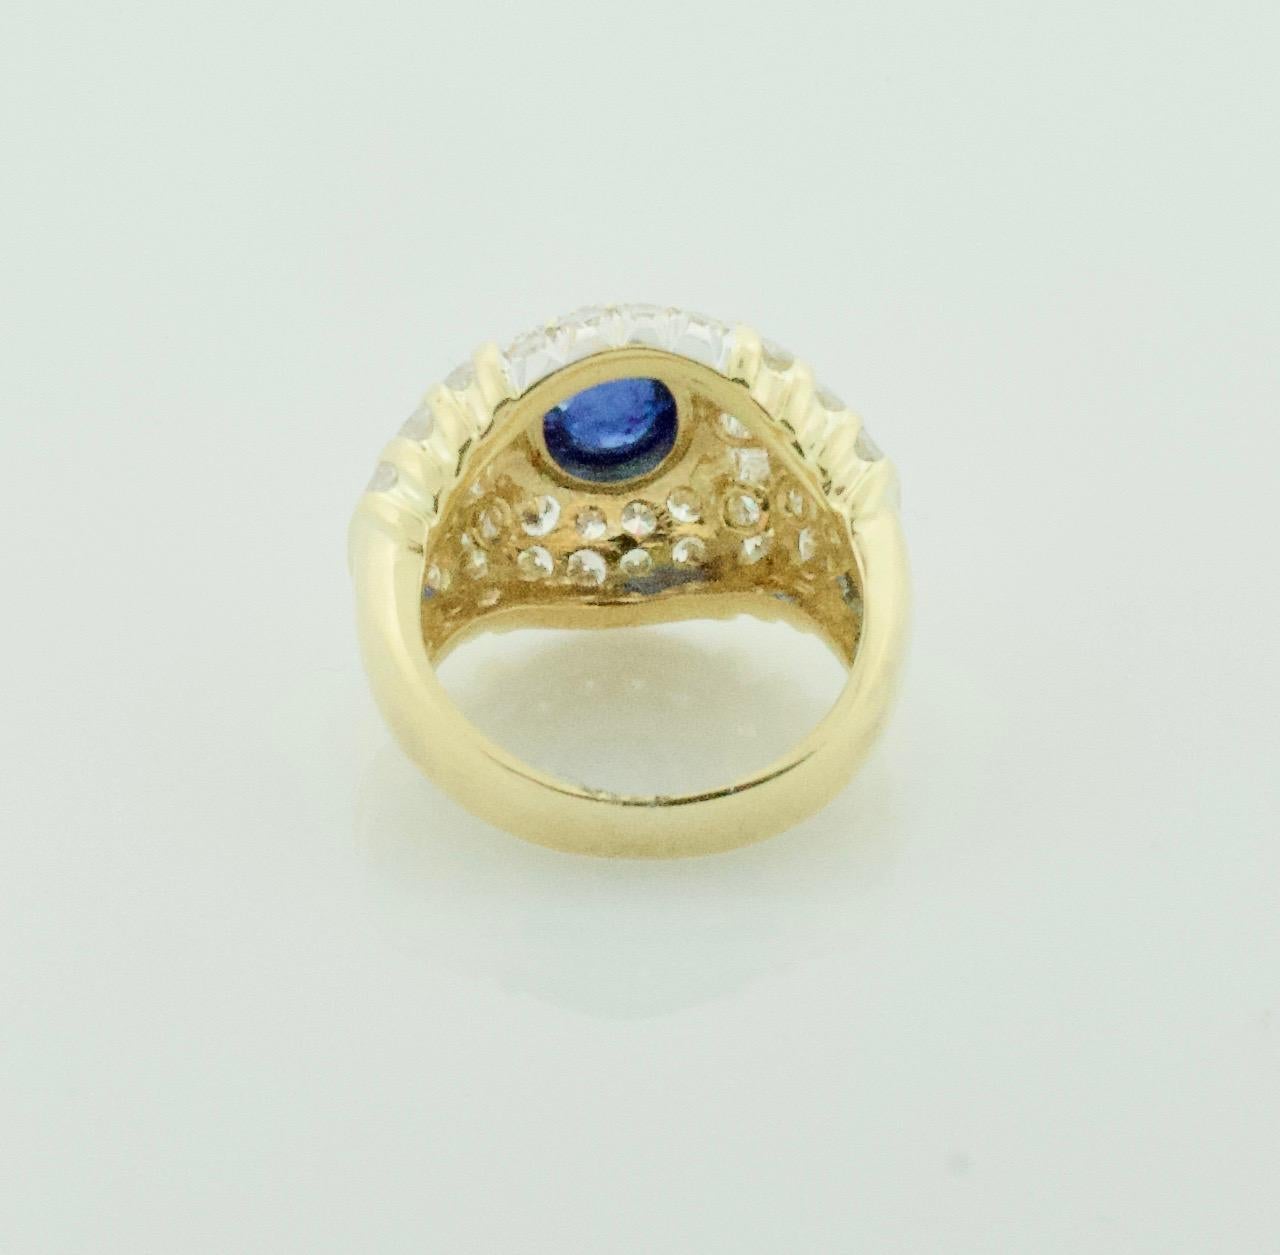 Modern Cabochon Sapphire and Diamond Fashion Ring in 18 Karat Yellow Gold circa 1970s For Sale